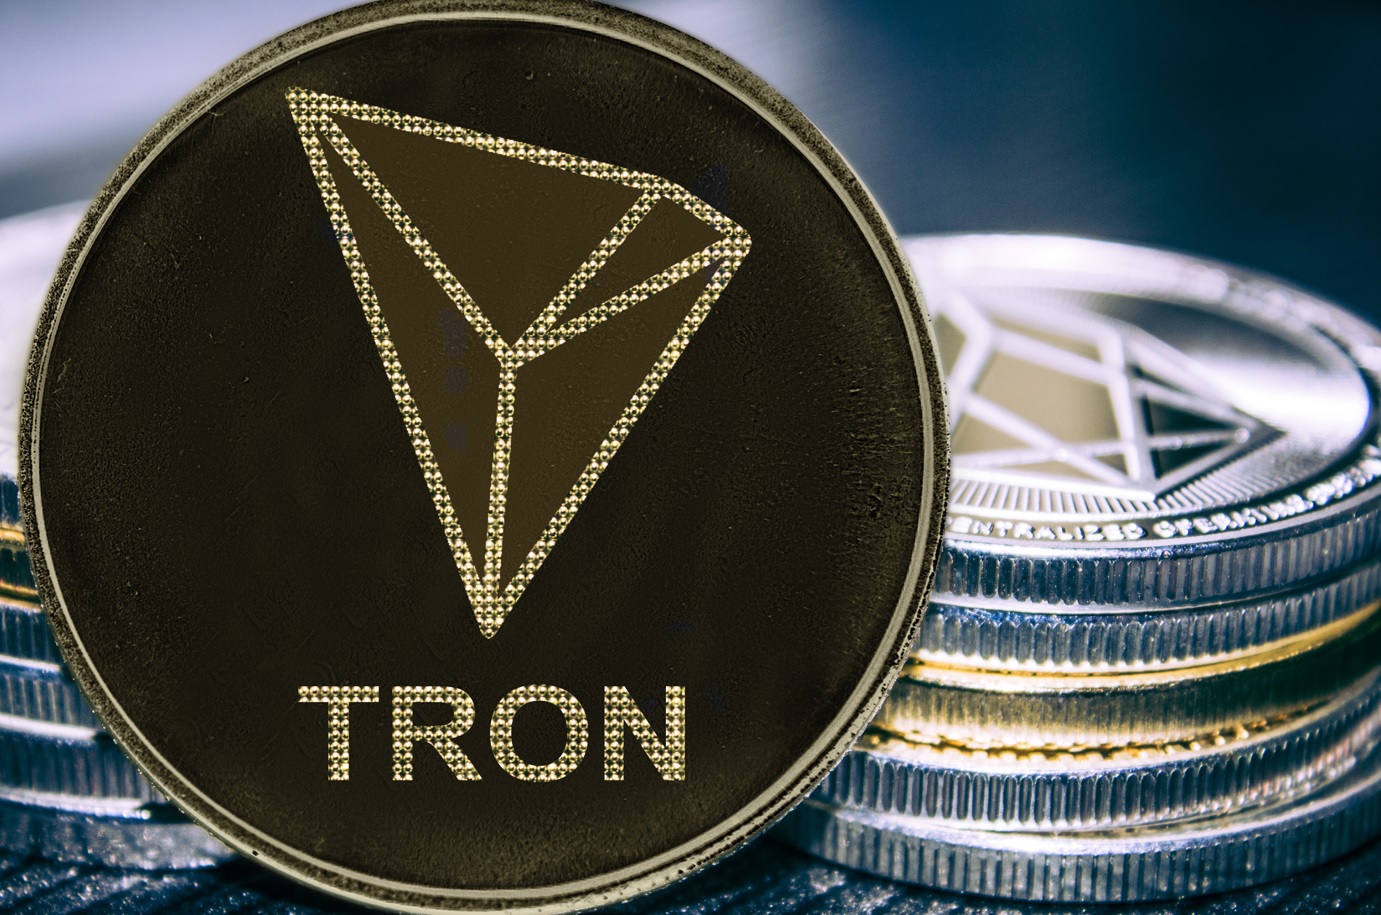 Justin Sun: Tron will have no problem repelling speculation